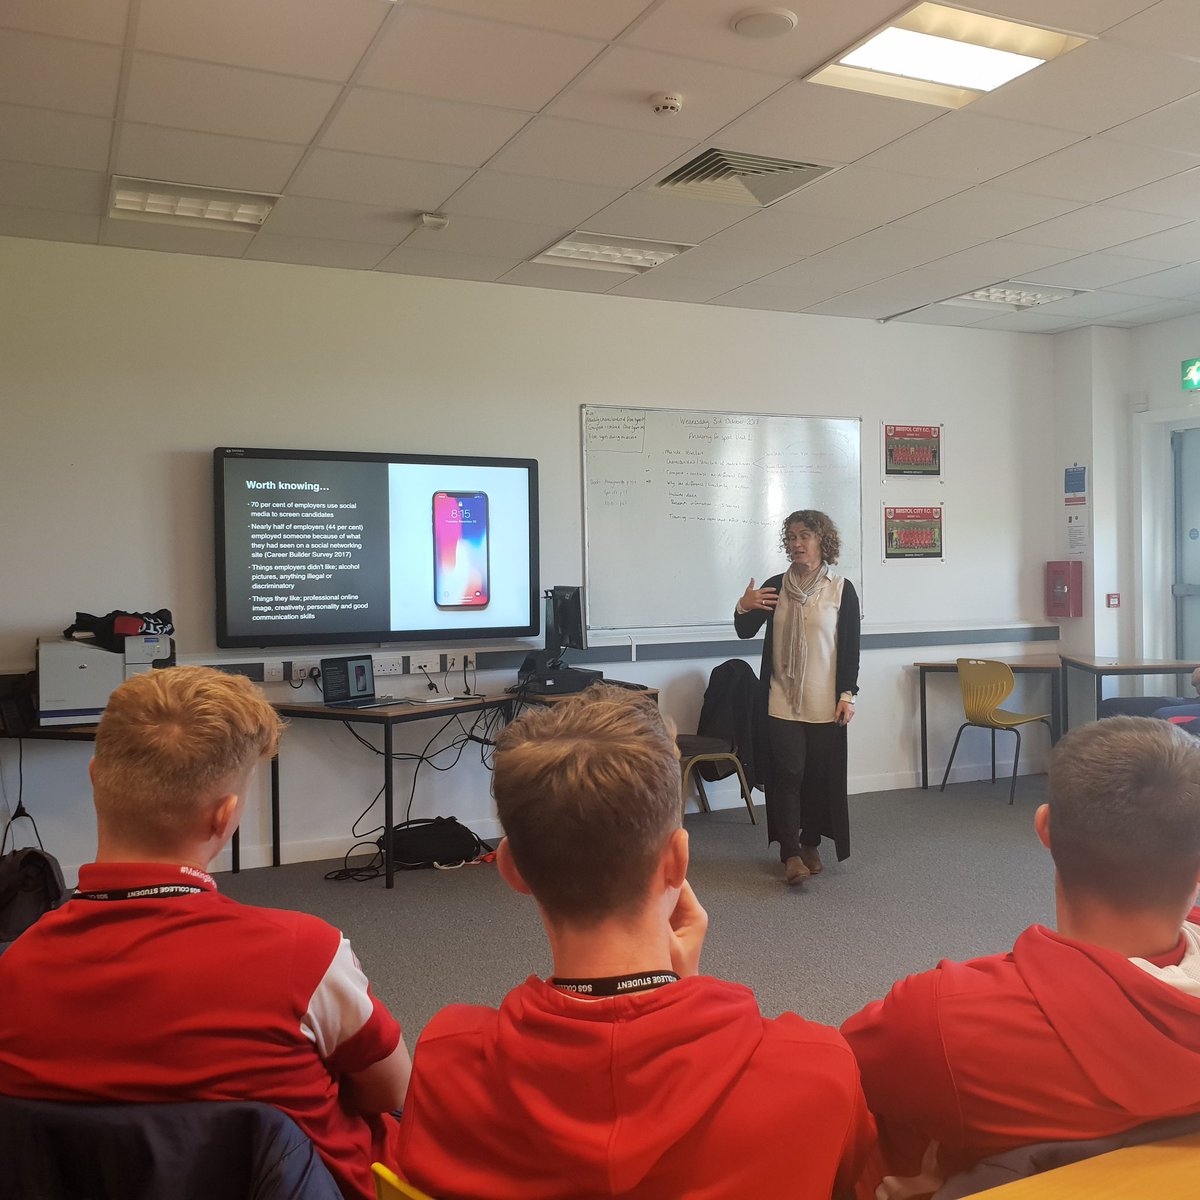 📲 Fantastic life skills session with @WoodCathy for our U18s this morning. We've discussed how to use social media safely and responsibly... There's going to be a few profile changes tonight 👀😆 @LFEonline #socialmedia #education #BristolCity 🔥